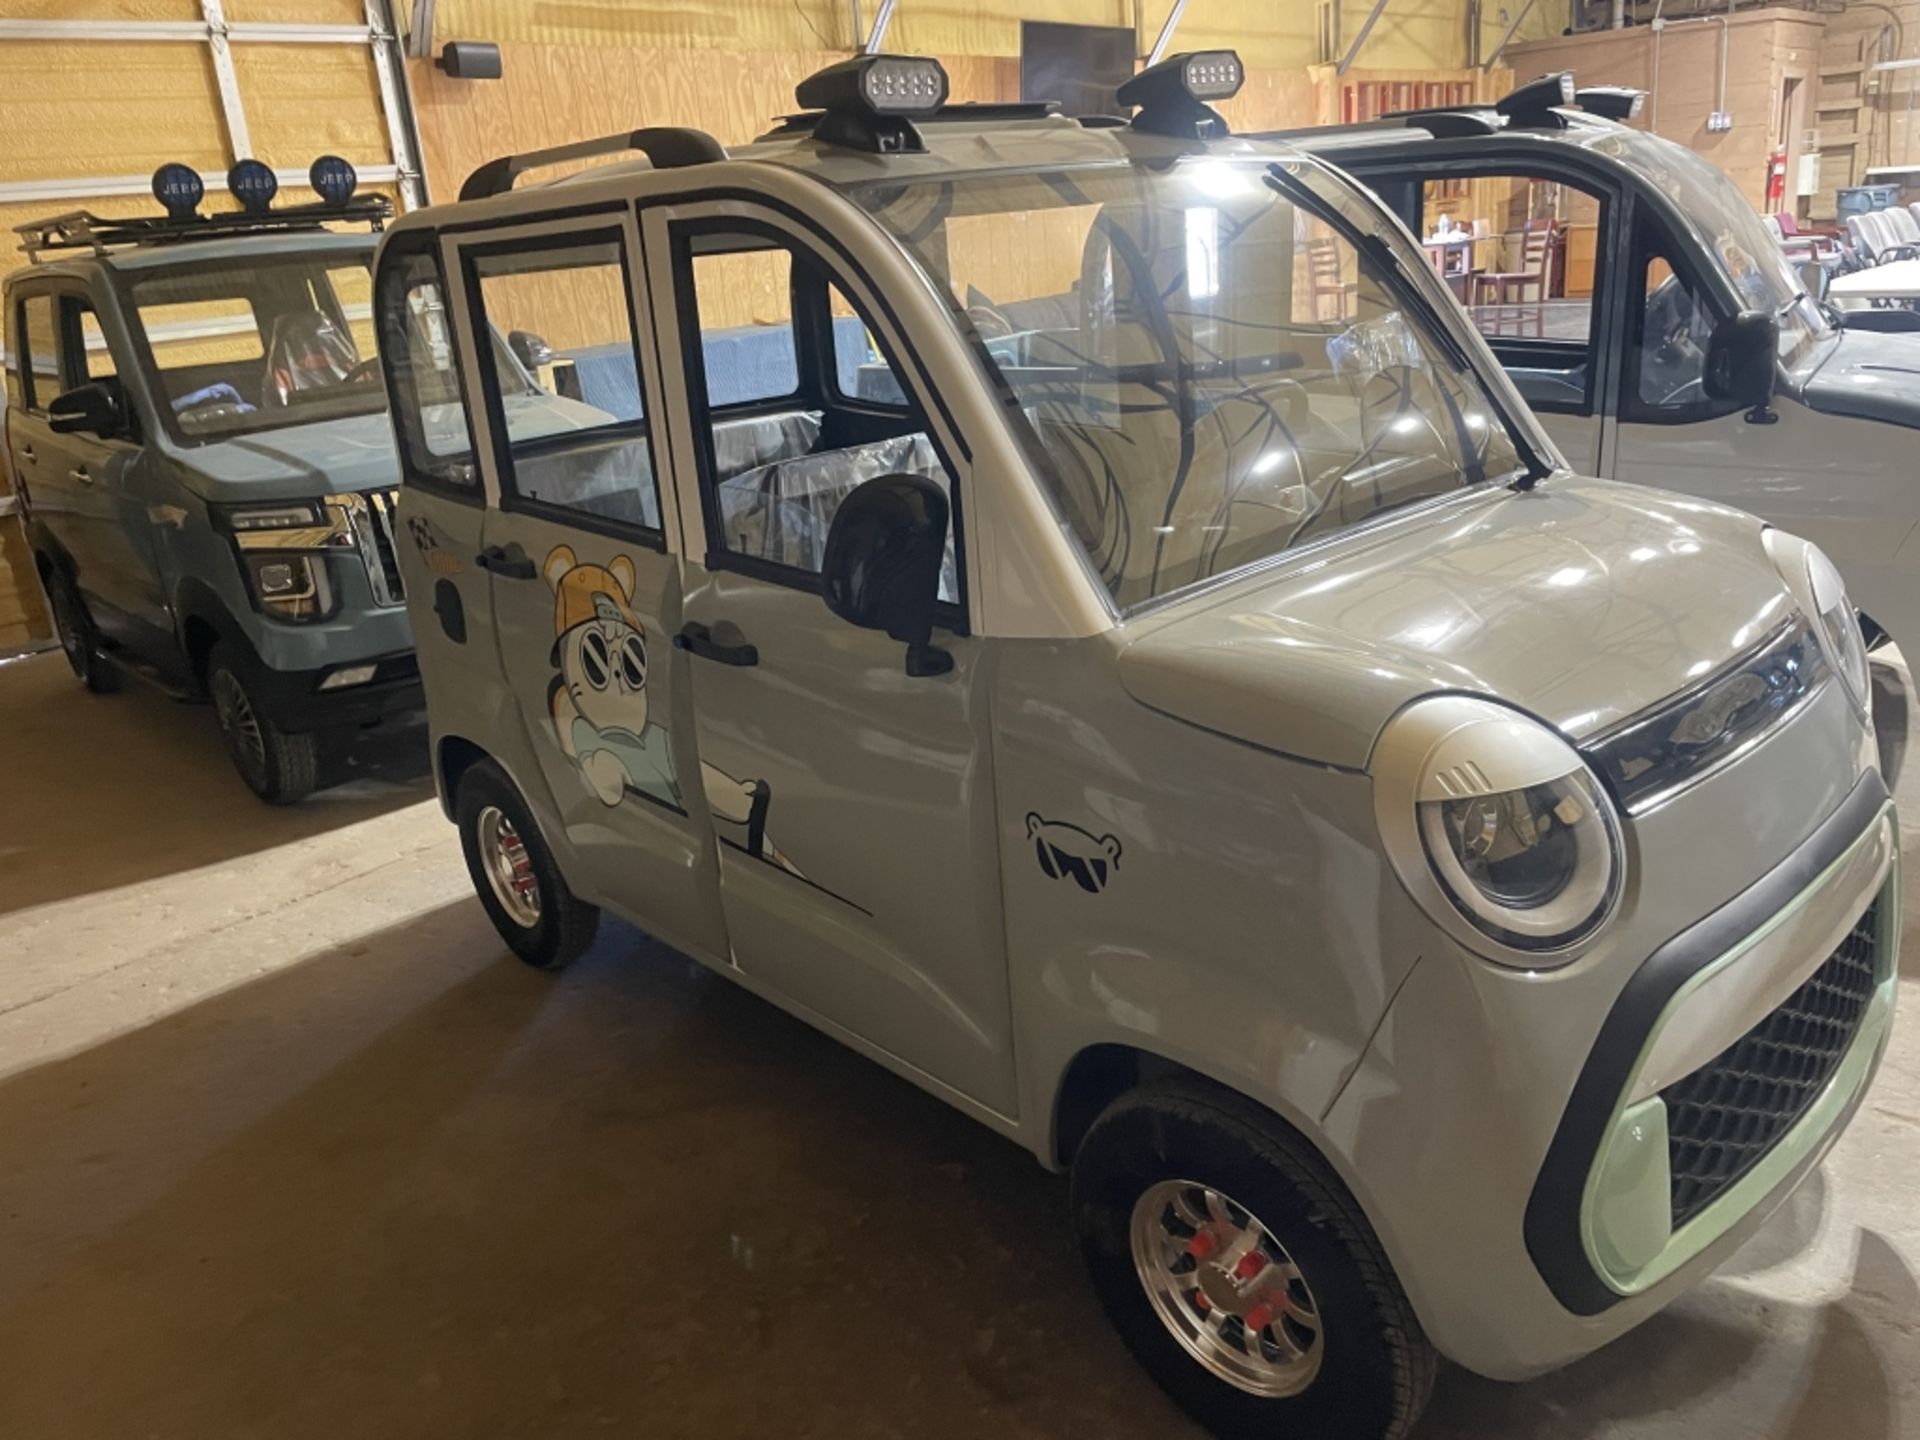 MECO M-F Electric Vehicle - Image 4 of 12